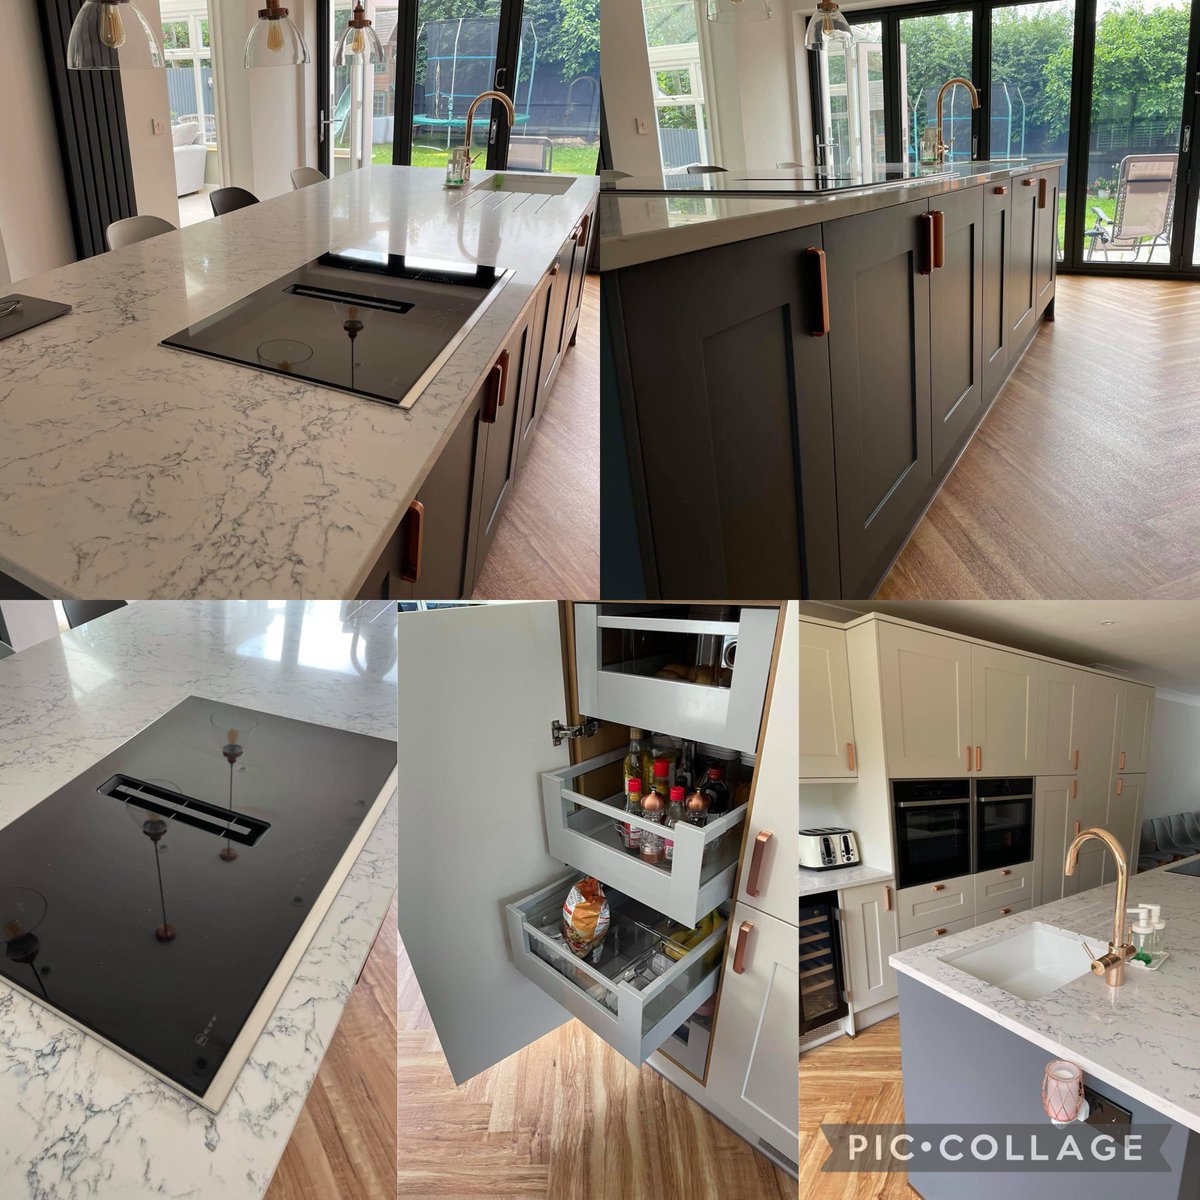 Check out this beautiful kitchen for Mr&Mrs T in Maldon, bleached stone shaker door with white attica quartz worktop, full set of @NEFFHomeUK, wine fridge from @caple, handles and pull out bin from @HafeleUK @InSinkEratorUK 4in1 kettle tap and a space tower from @blumuk